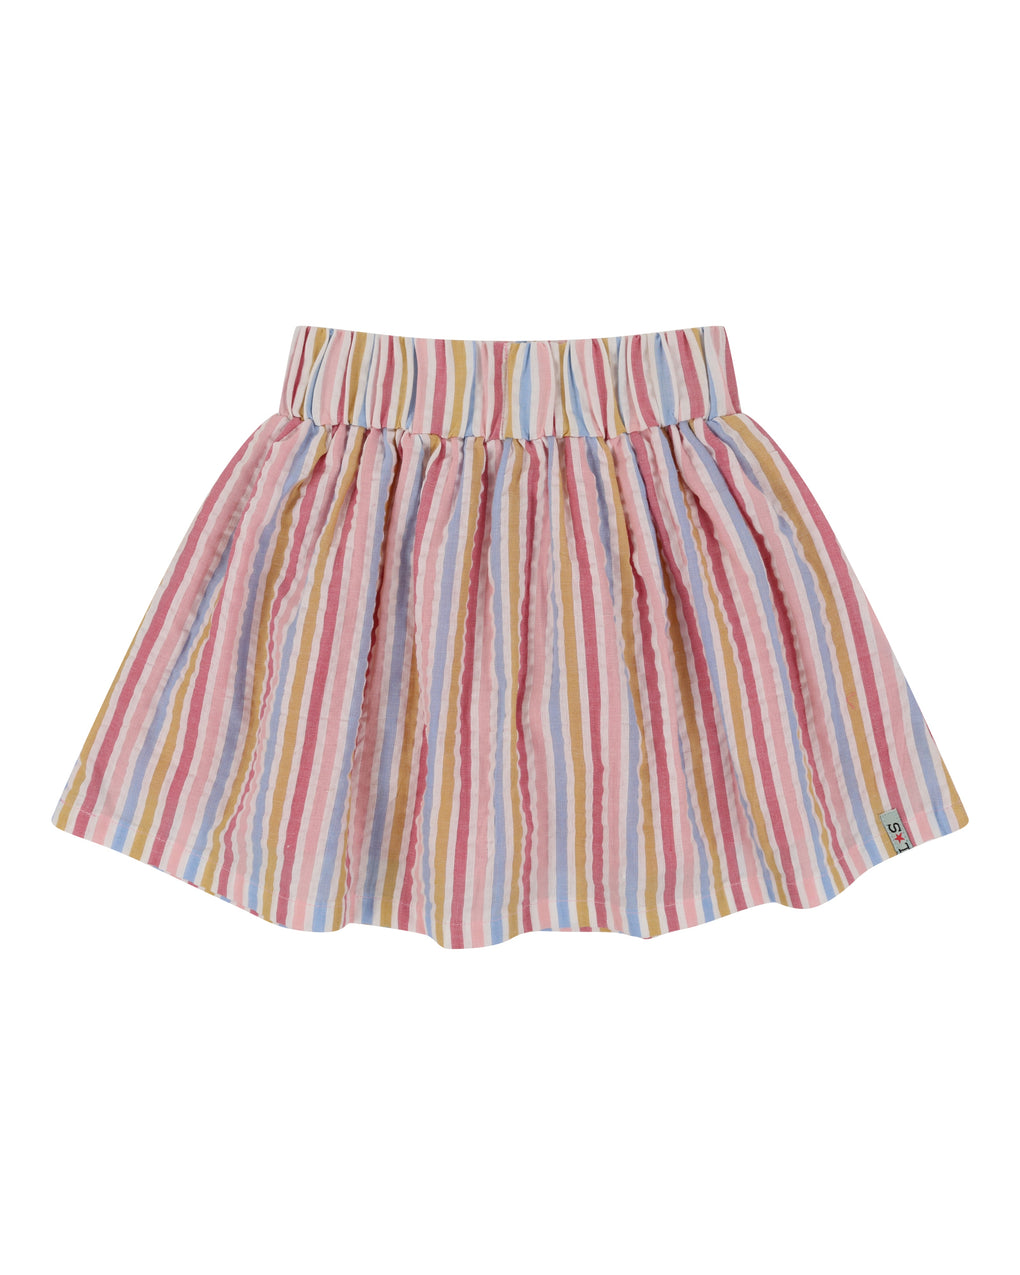 Lilly + Sid | Candy Stripe Skirt